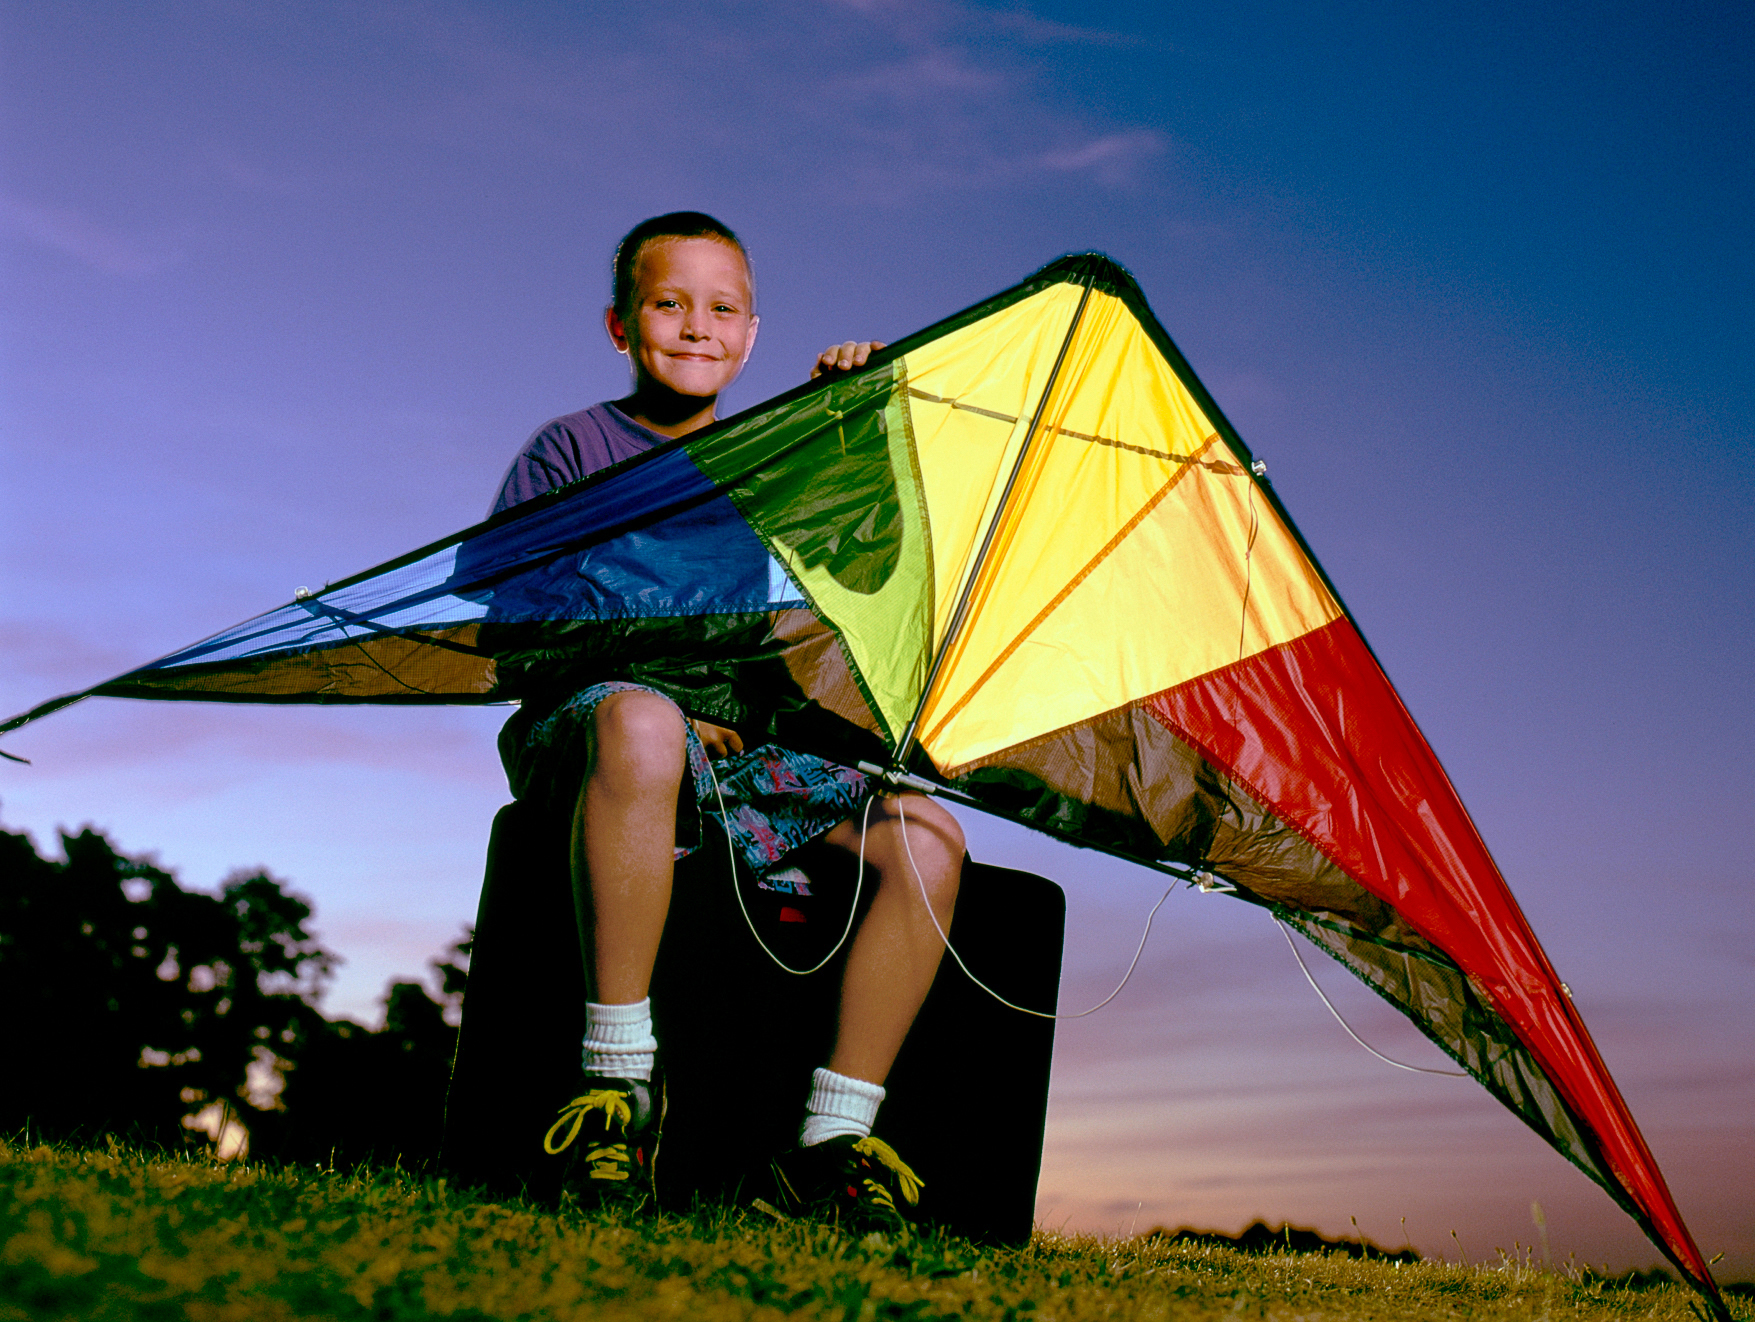 Dusk portrait of young male stunt kite flyer